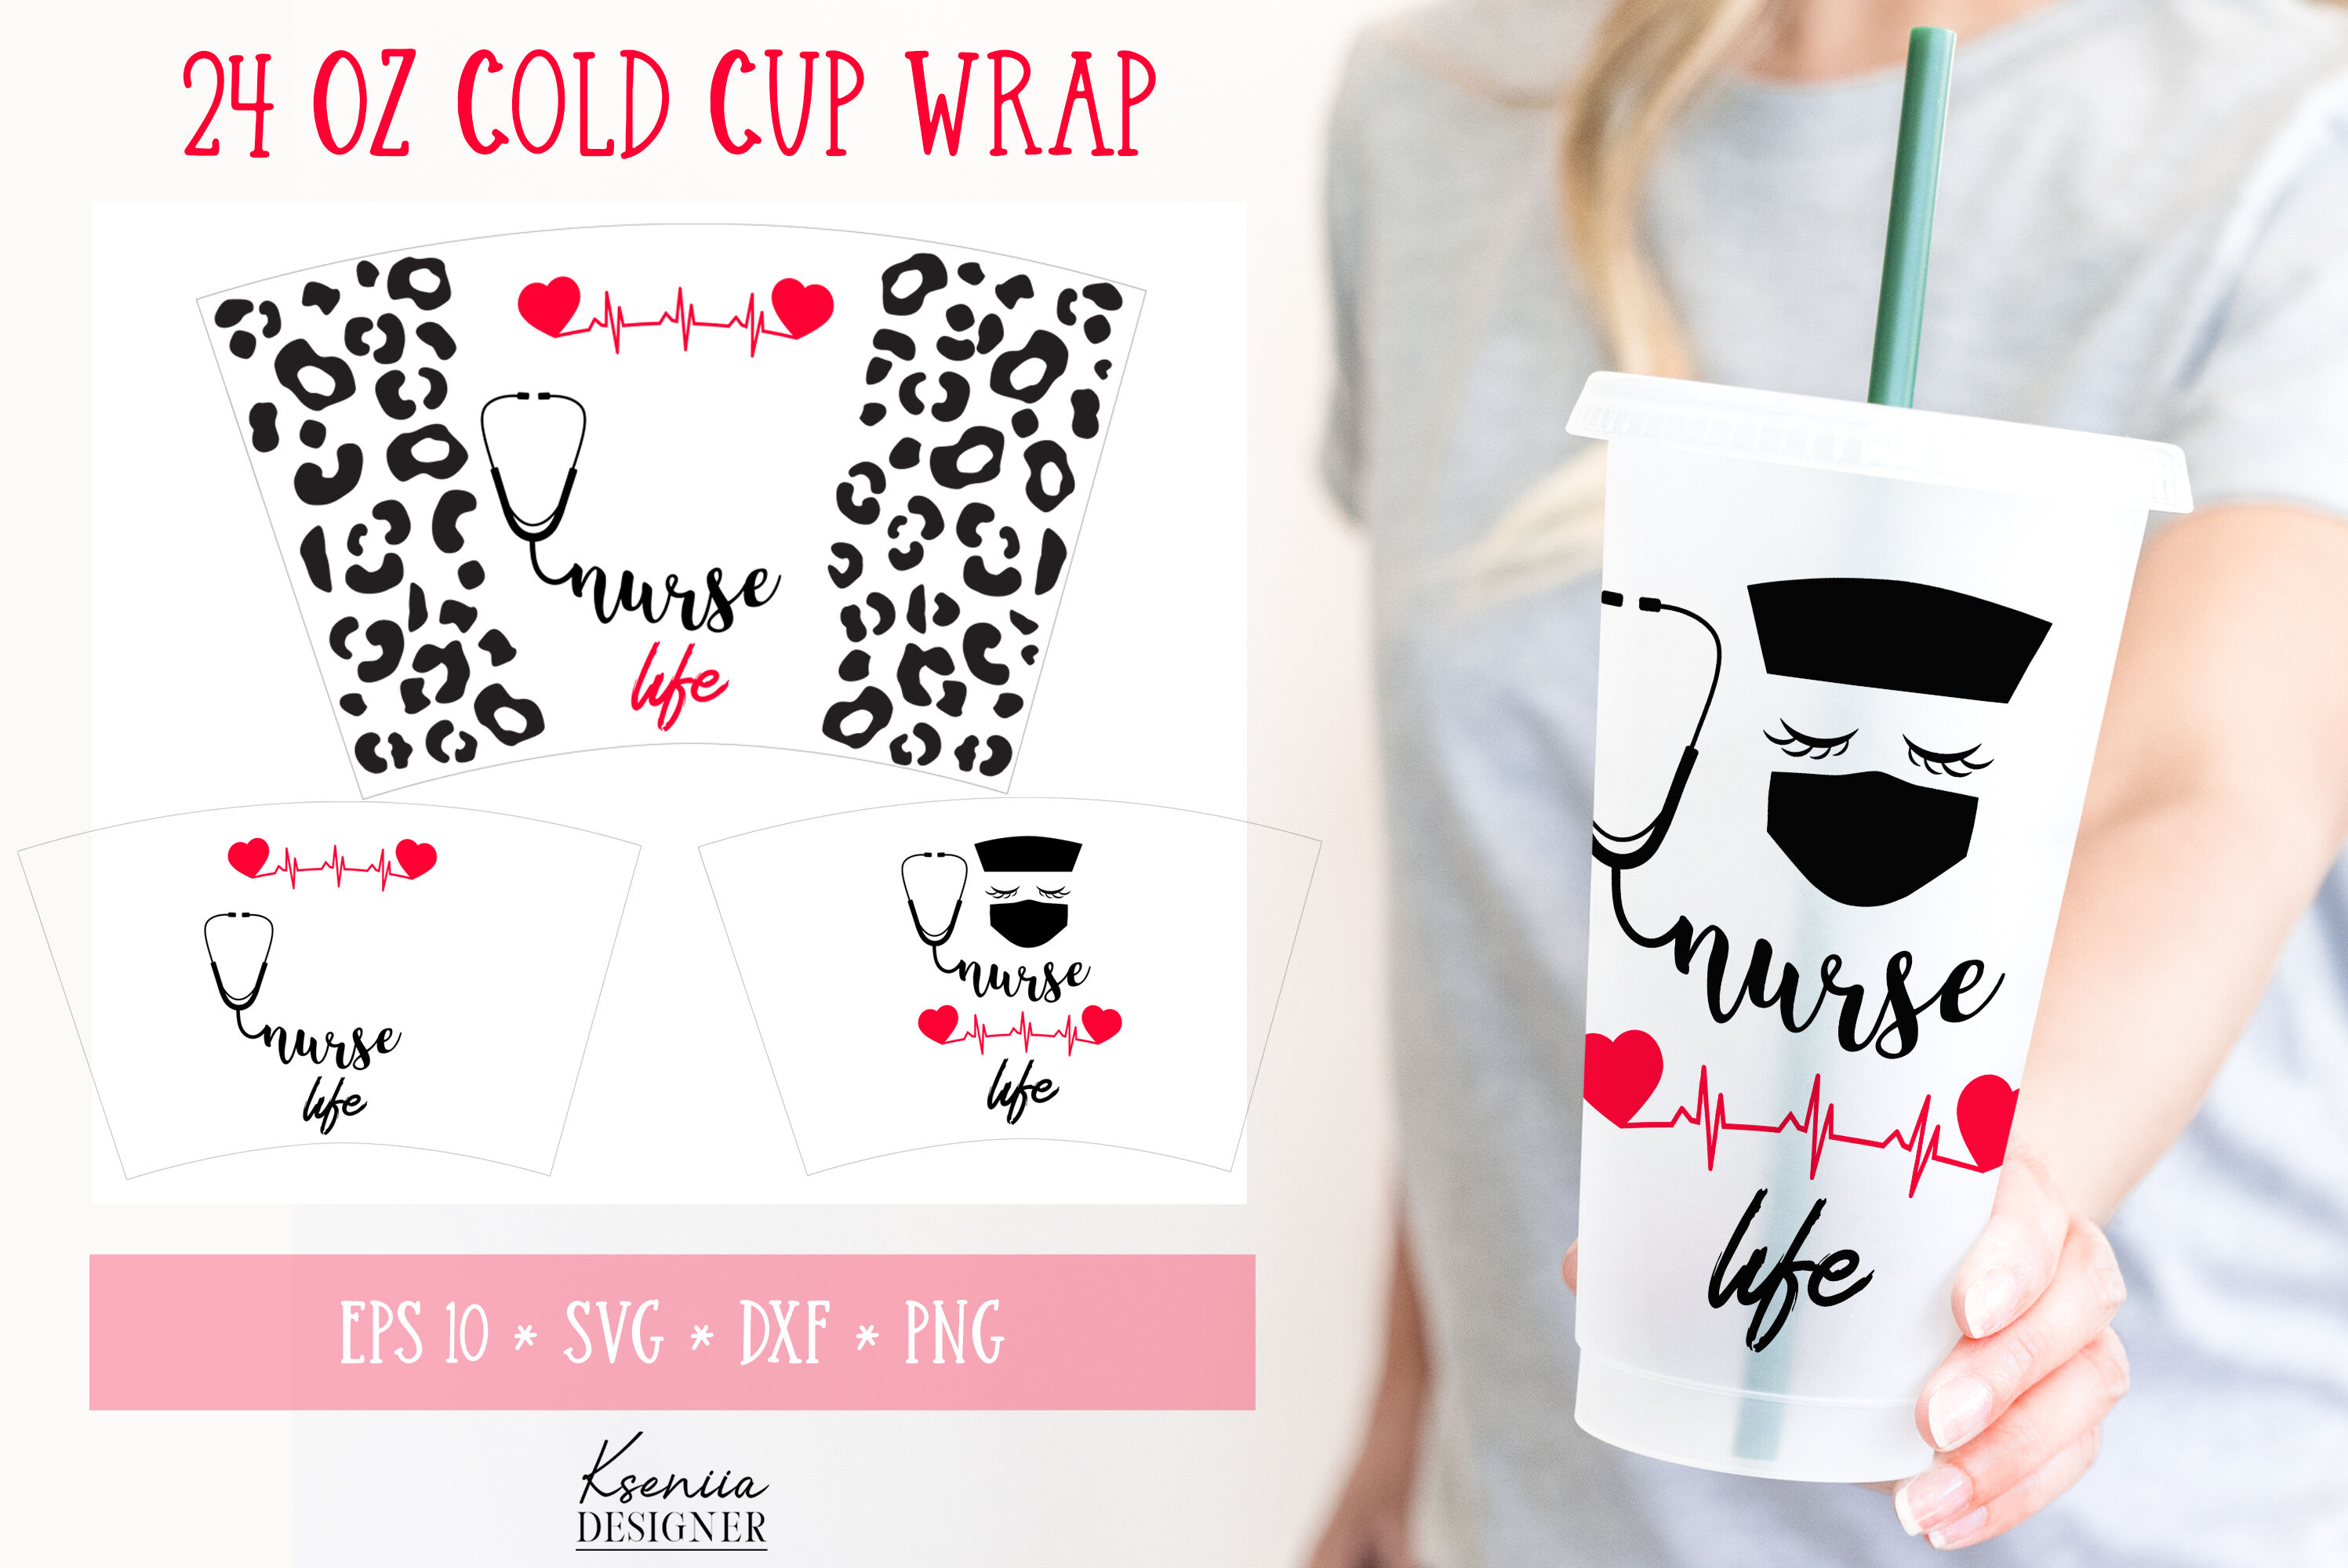 Nice Cold Cup Wrap